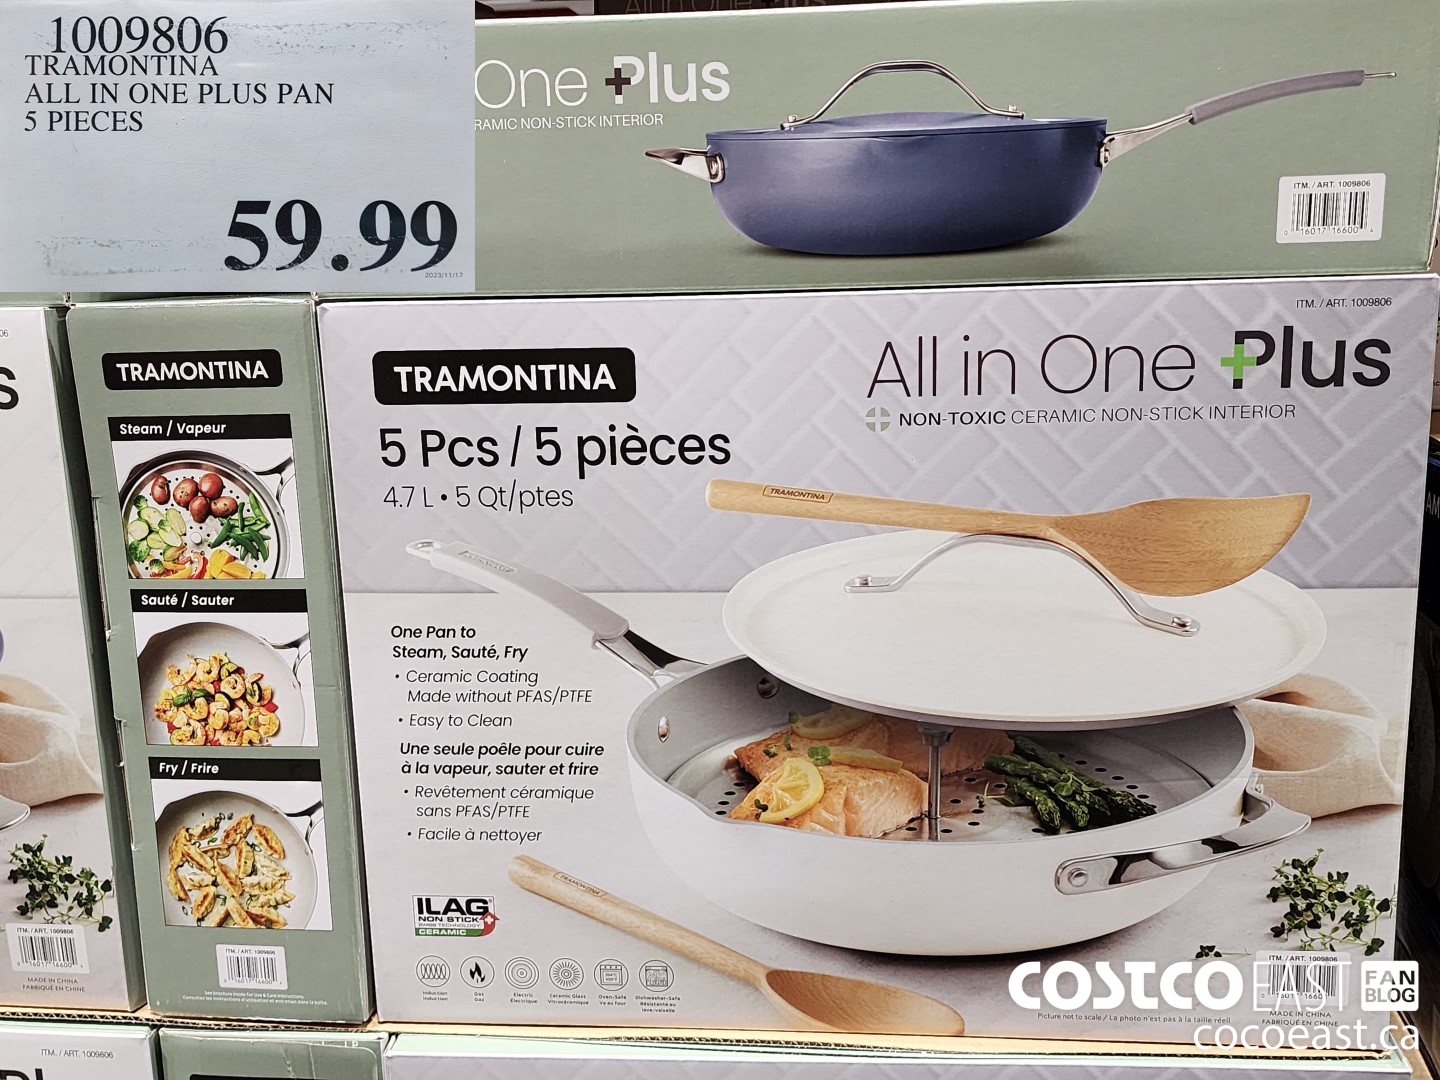 1009806 TRAMONTINA ALL IN ONE PLUS PAN 5 PIECES $59.99